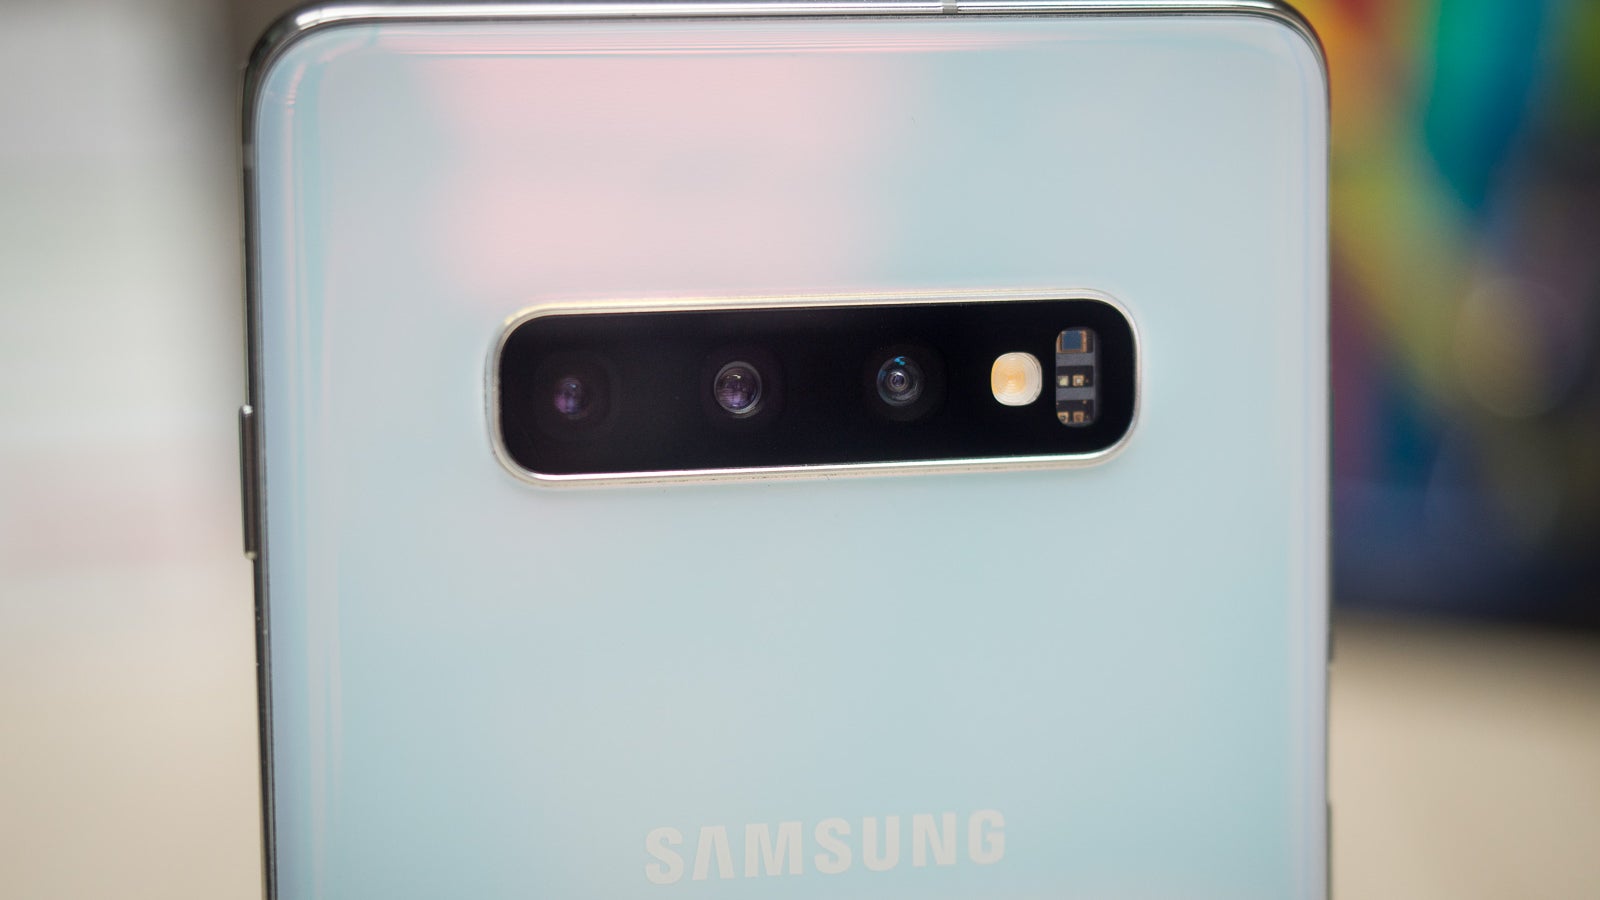 Samsung Has Fixed Our Biggest Complaint About The Galaxy S10 Camera